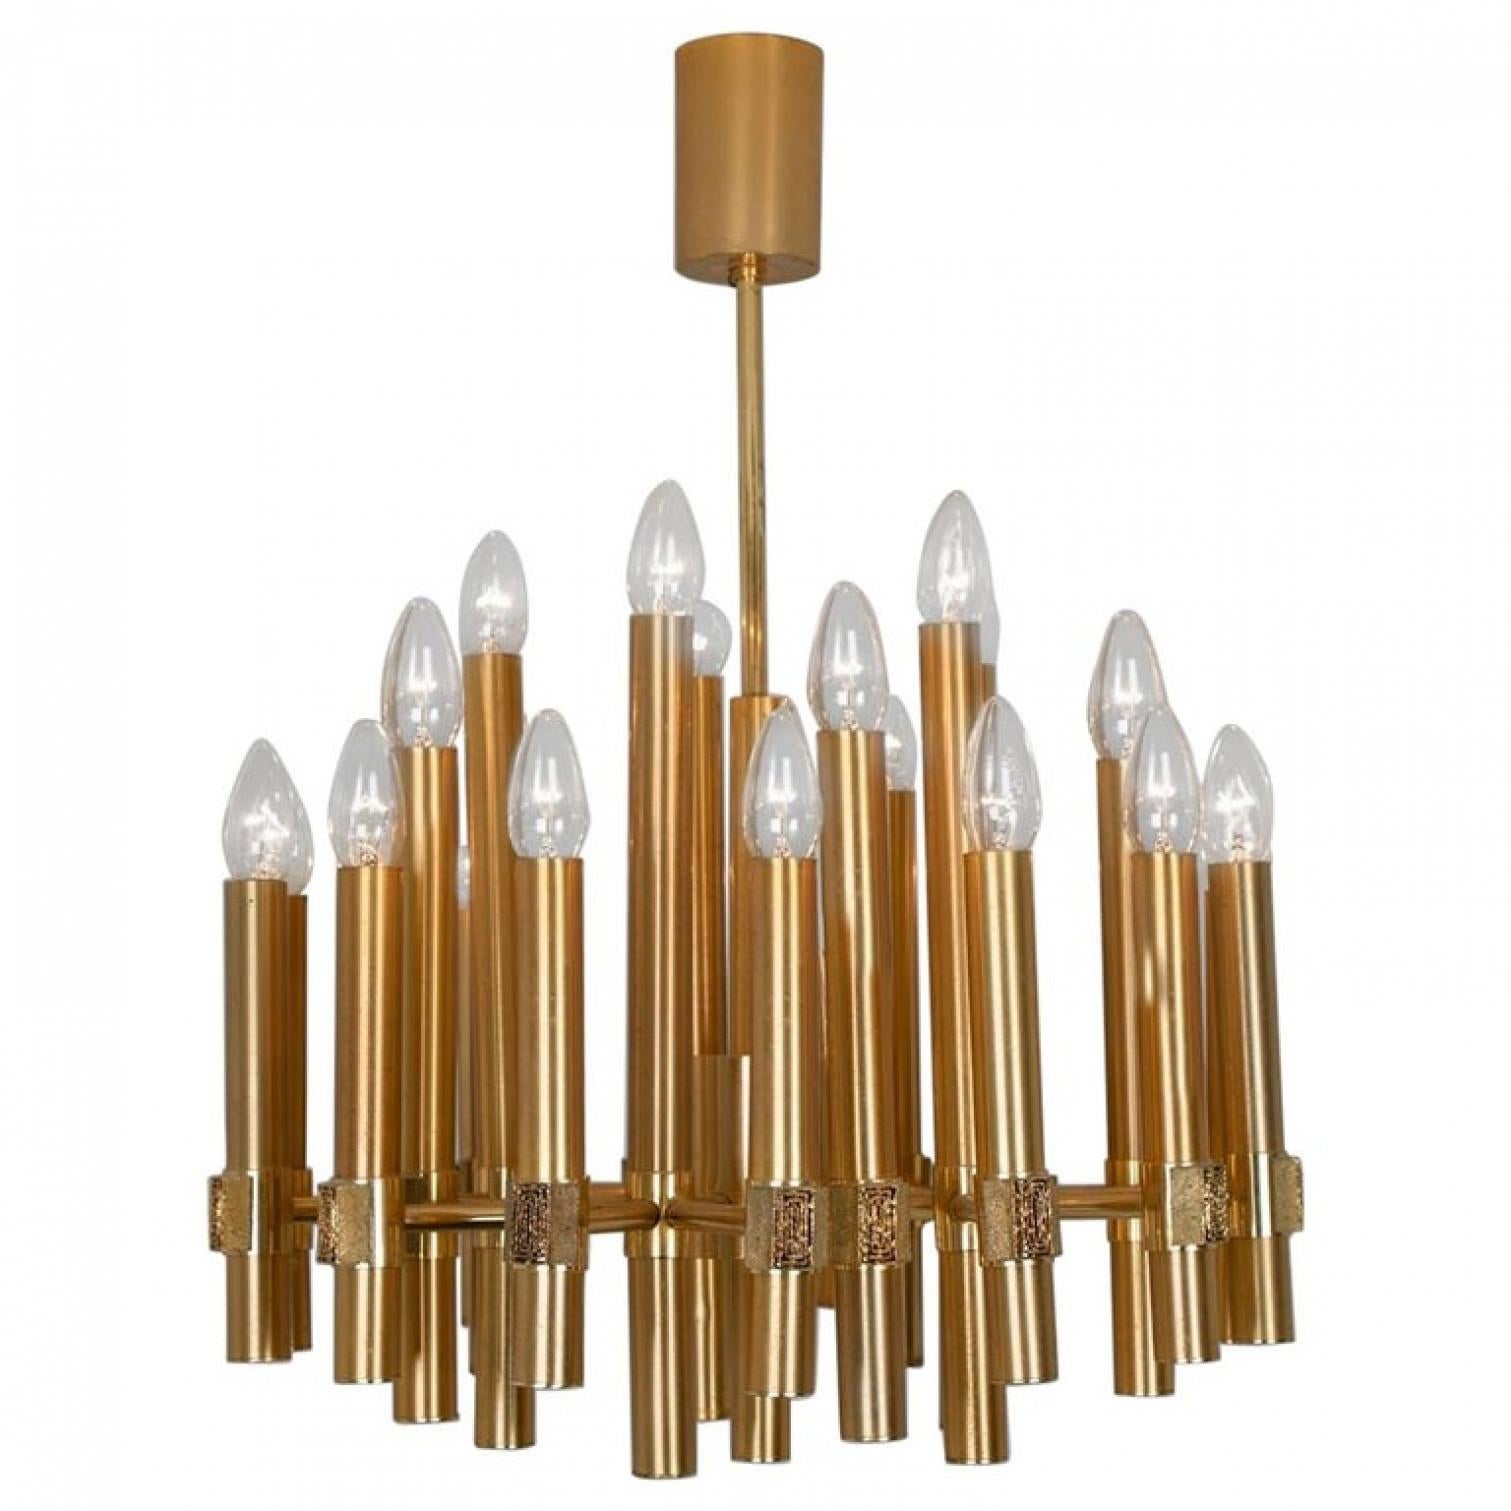 Impressive Sputnik style chandelier by Angelo Brotto for Esperia Italia, brass ramificated structure with 20 arms.
The arms in the second row are slightly leaning outward.

Dimensions:
31.5 inch (80 cm) height (total height)
Diameter 20.87 inch (53